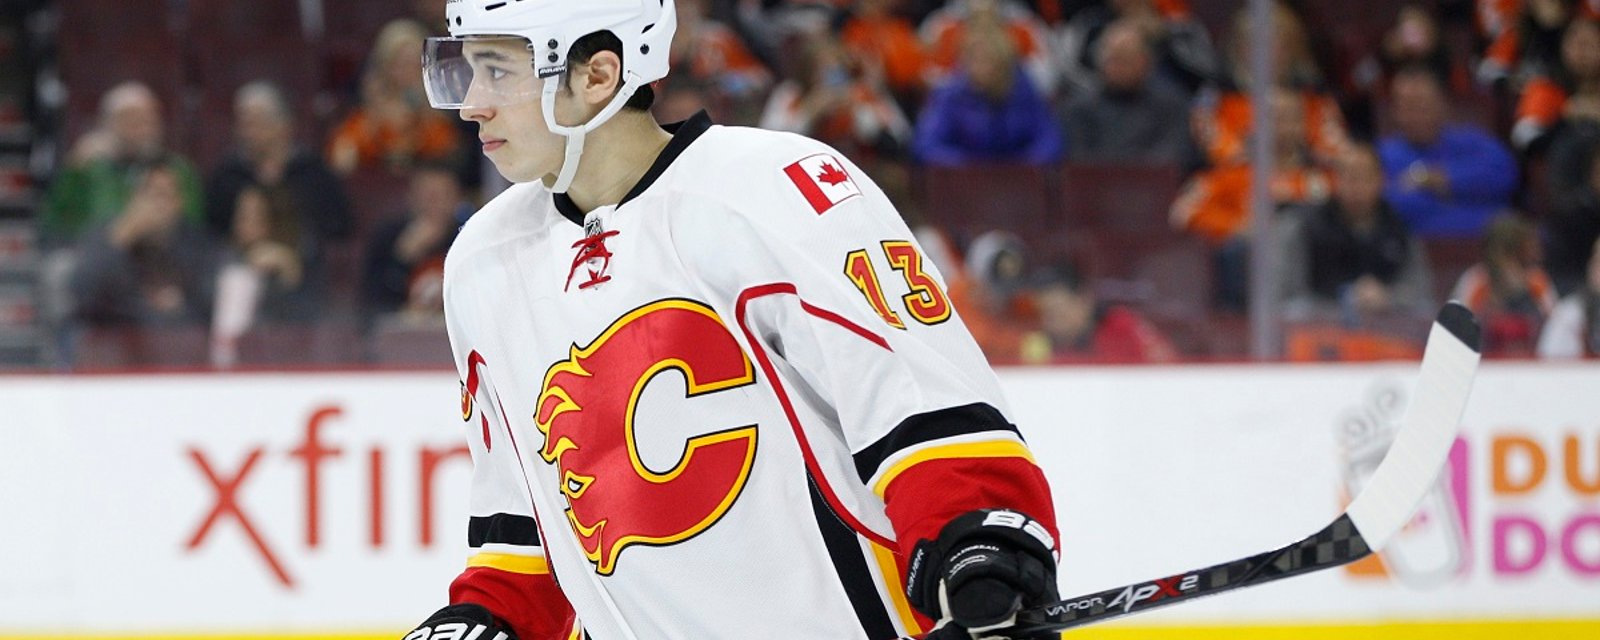 Breaking: Early reports of a major injury to Flames star Johnny Gaudreau.